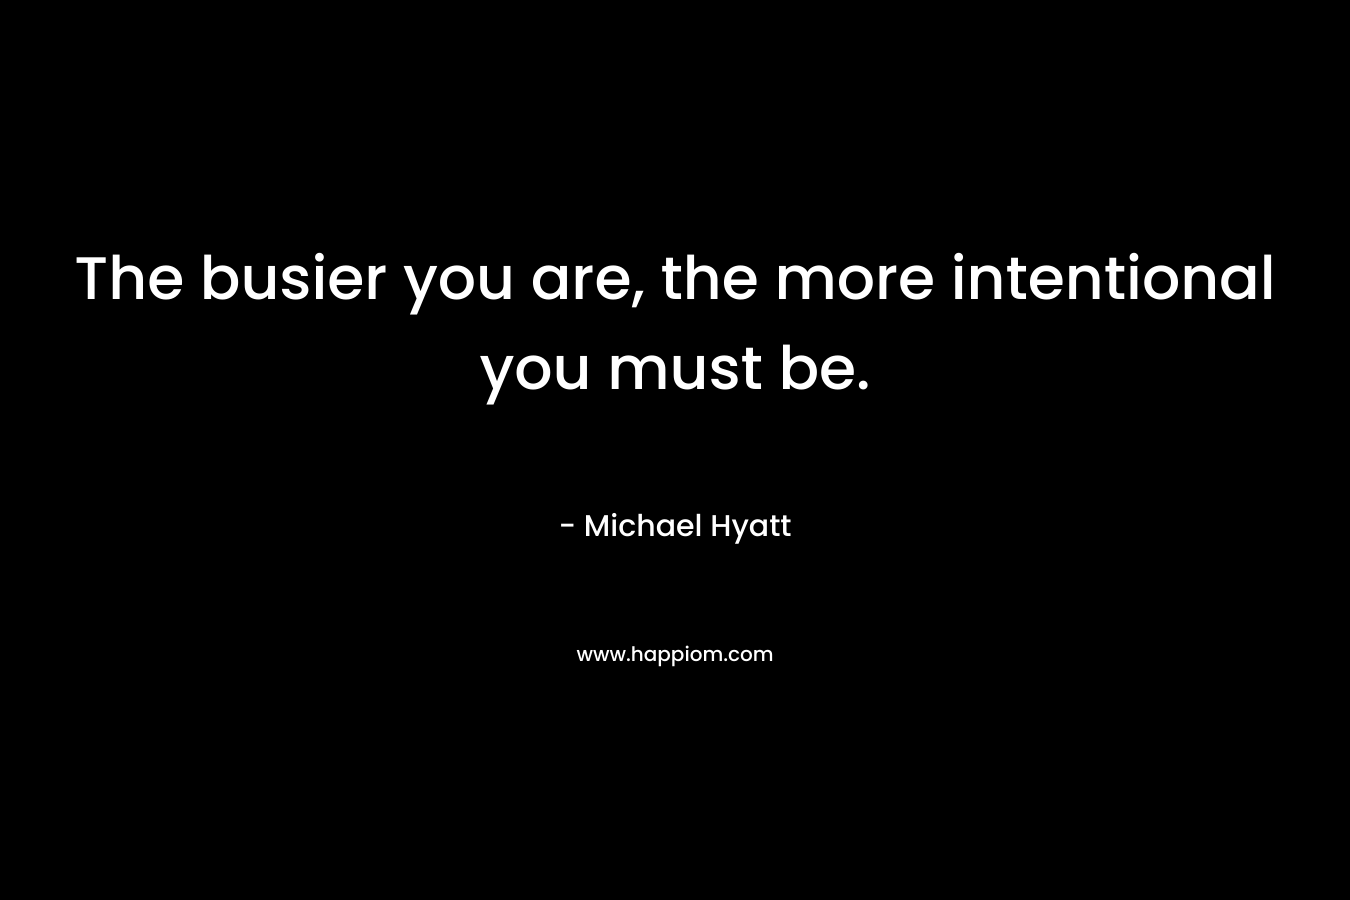 The busier you are, the more intentional you must be.